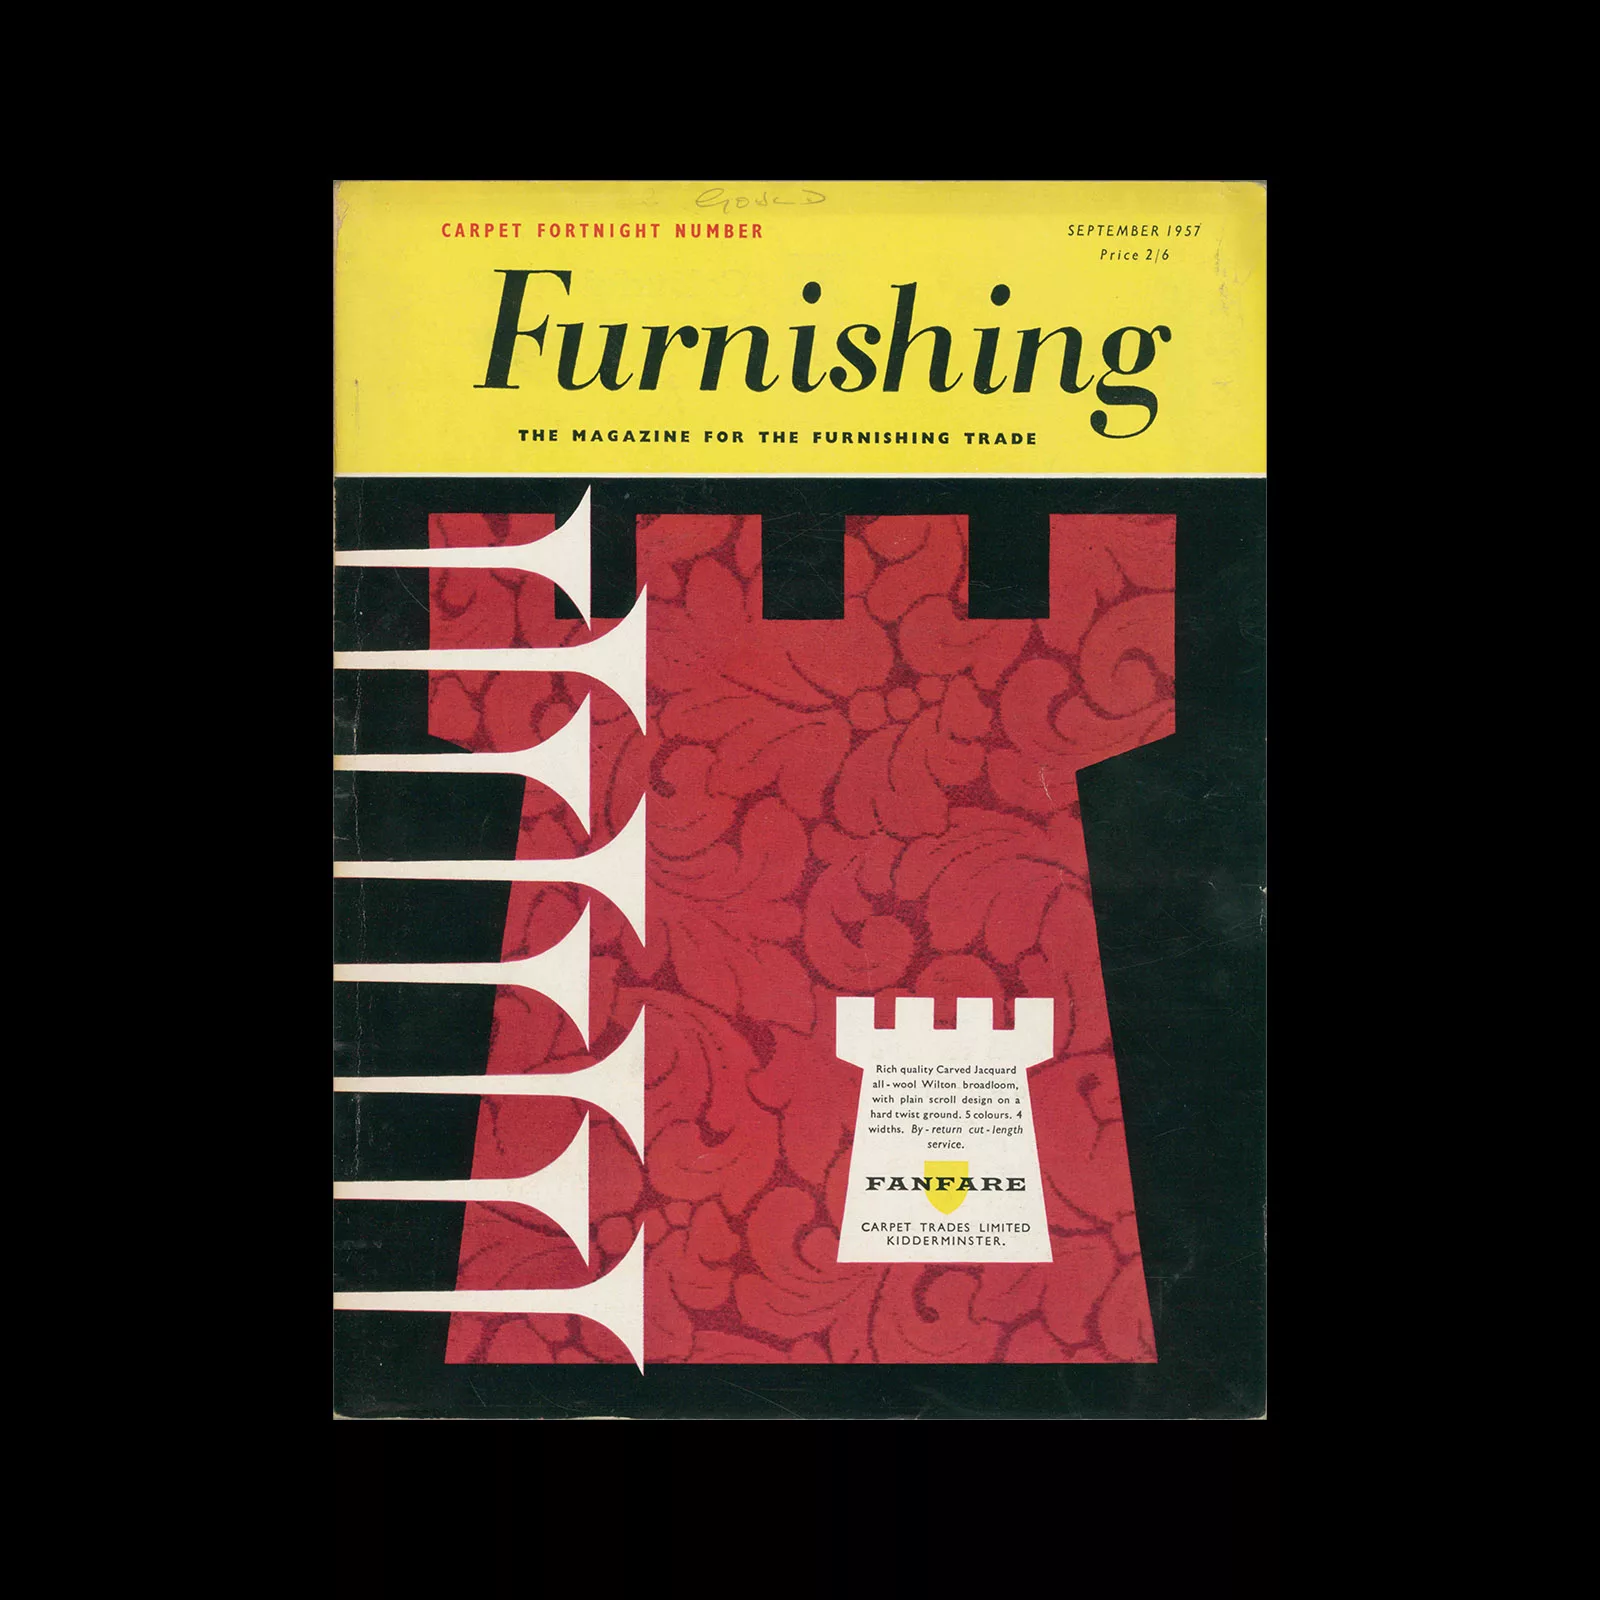 Furnishings, The Magazine For the Furnsihing Trade, Vol 75, No 3, September 1957